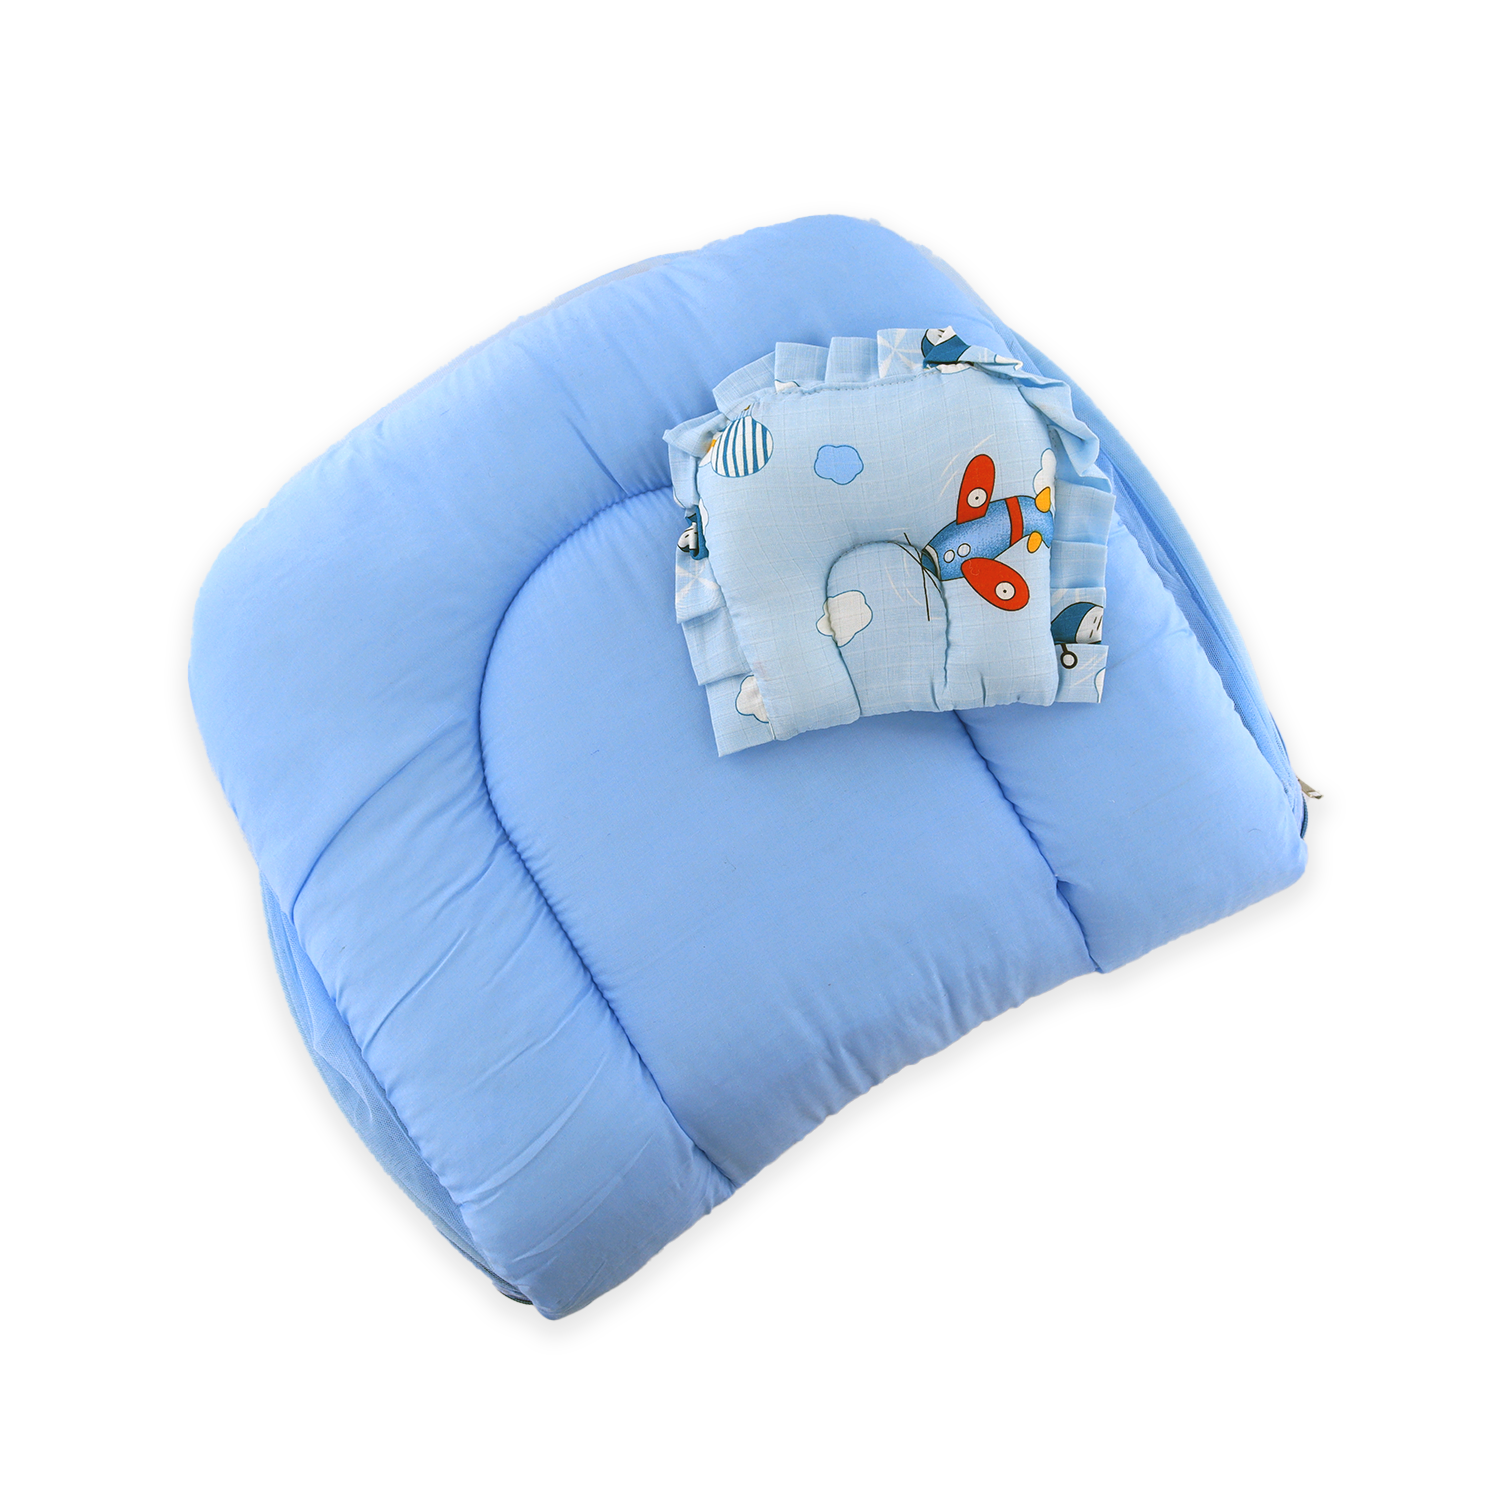 Tent Mattress Set with Neck Pillow Catch Me If You Can Blue